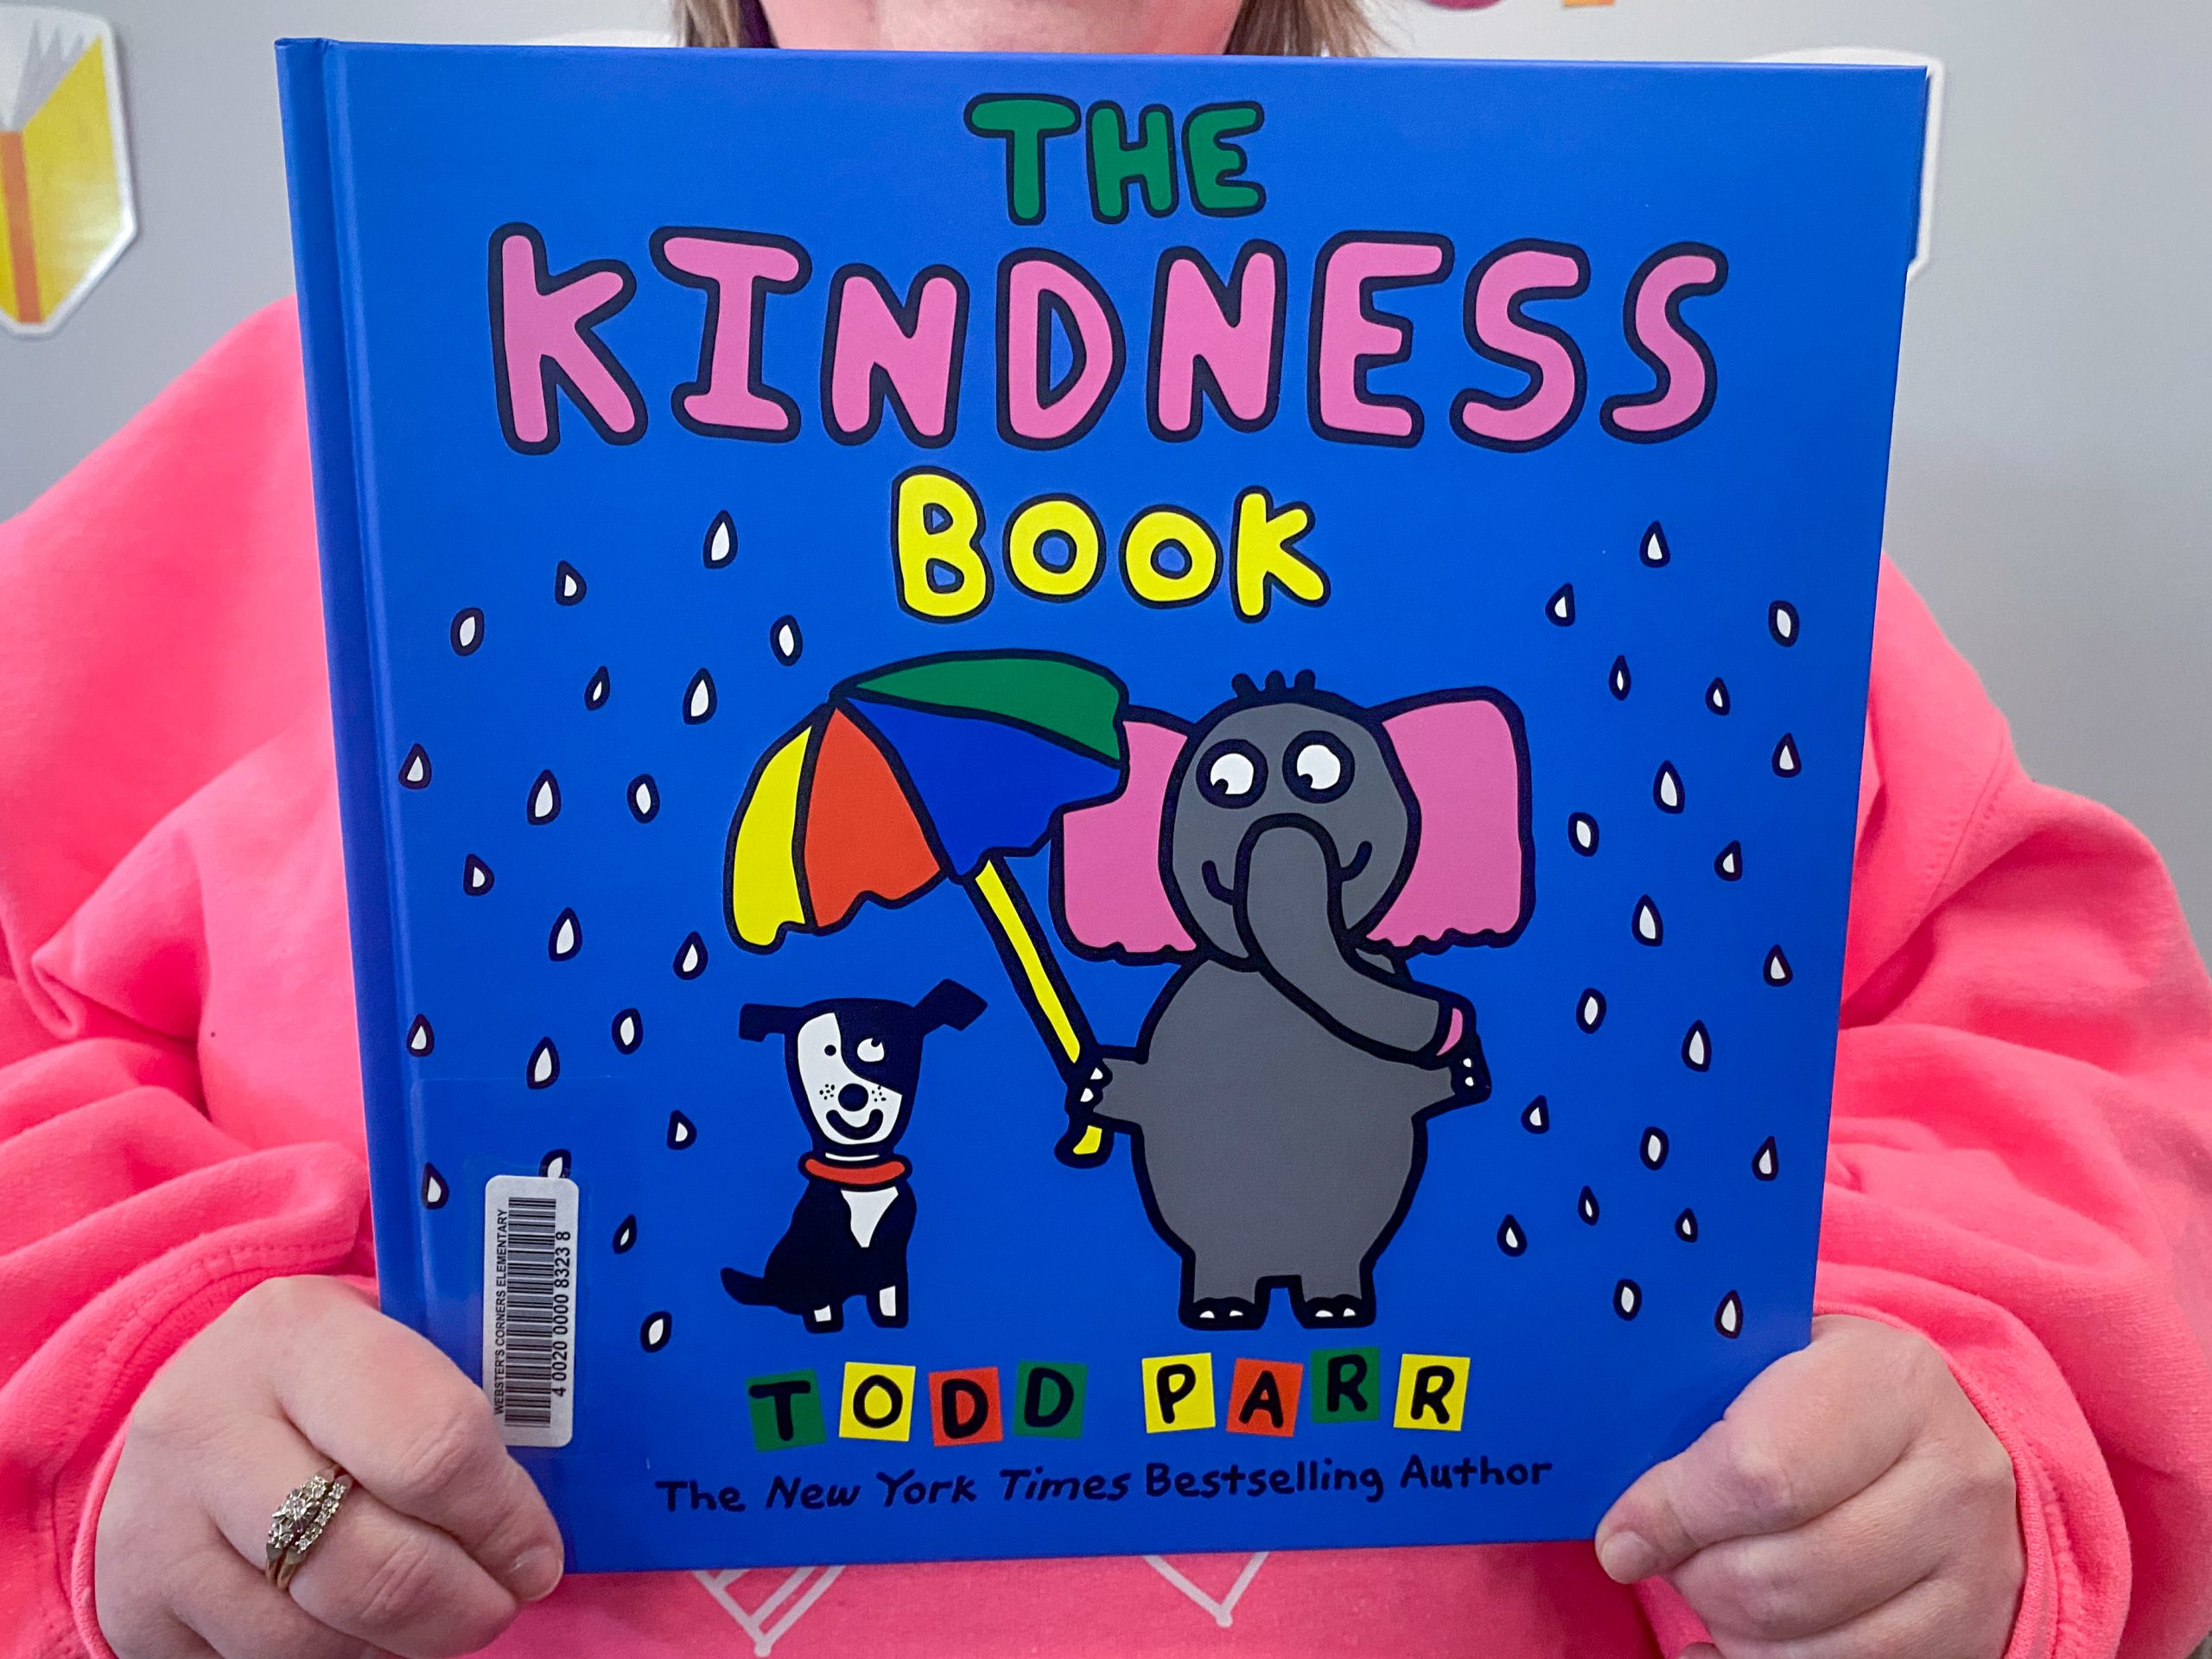 "The Kindness Book" by Todd Parr.